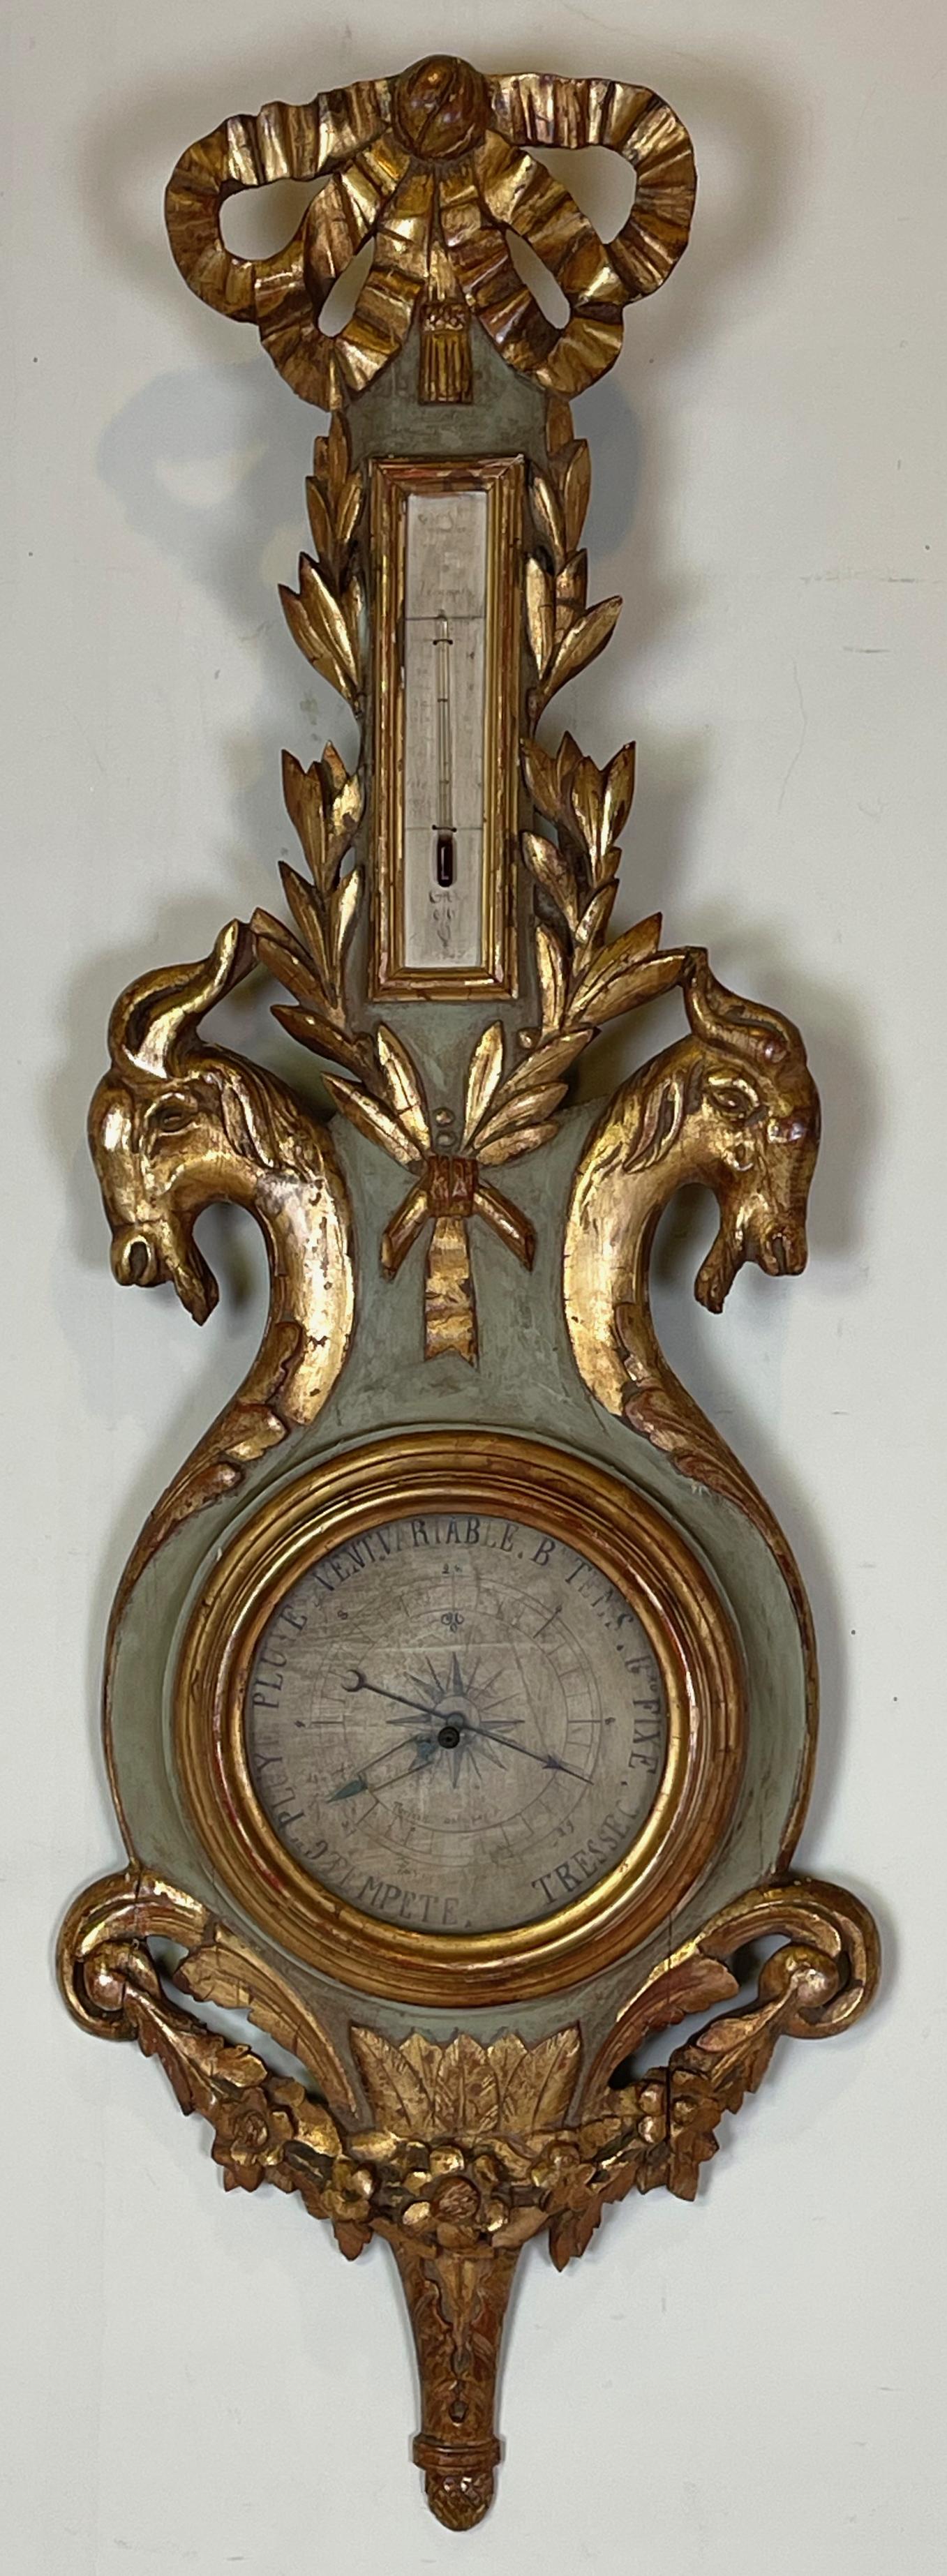 An elegantly carved painted and gilt decorated late 18th C., Louis XVI, French barometer with original thermometer.